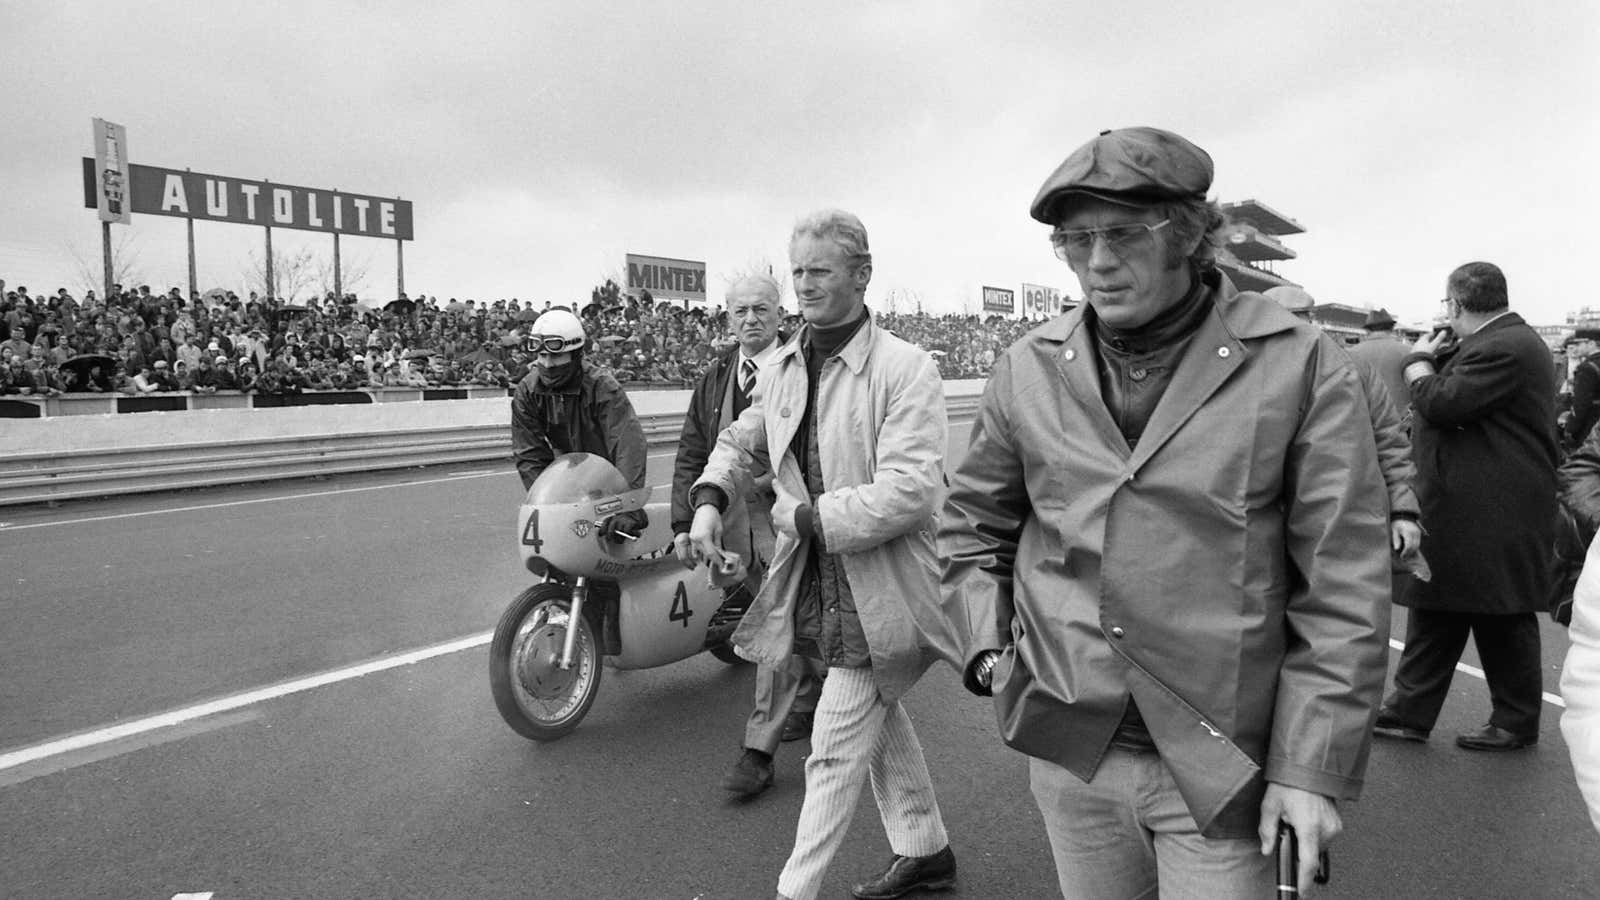 Steve McQueen at Le Mans in 1970